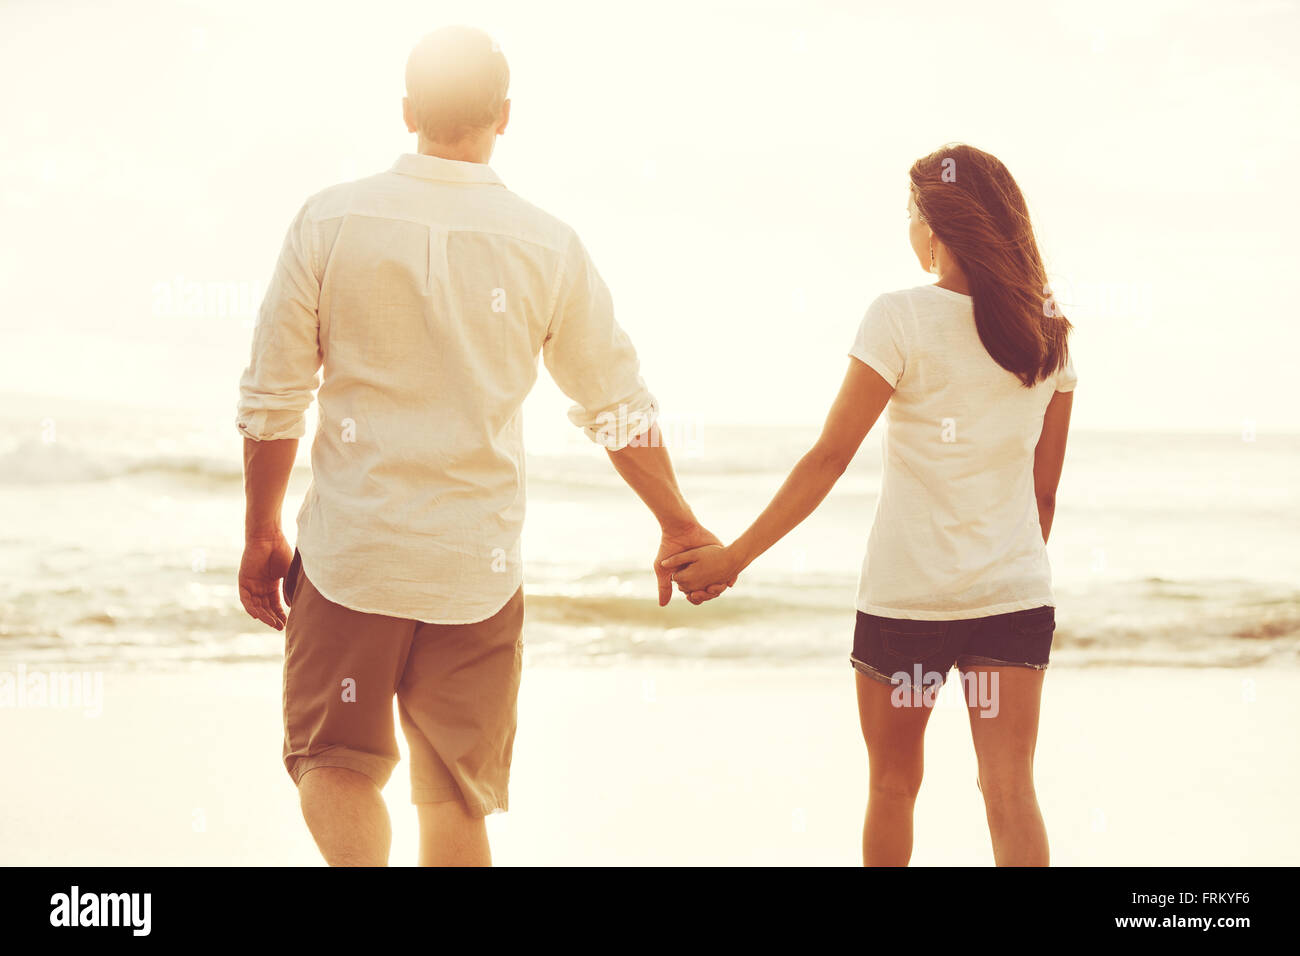 Happy romantic couple on the beach at sunset. Young lovers on vacation. Stock Photo